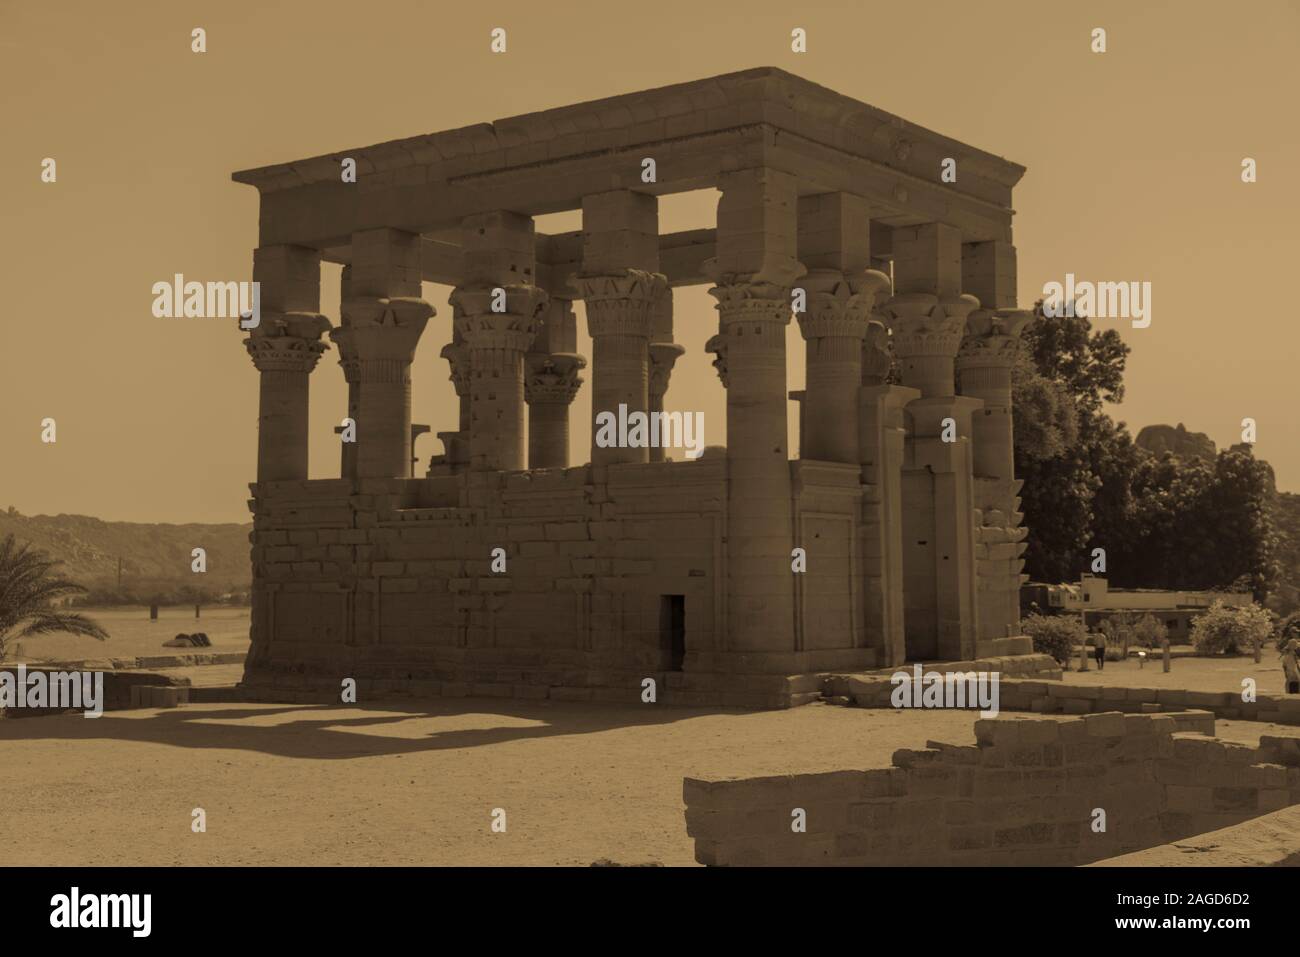 NOVEMBER 15, 2019, LAKE NASSER, EGYPT - Philae Temple is located on an island of the Aswan Low Dam, downstream of the Aswan Dam and Lake Nasser, Egypt Stock Photo